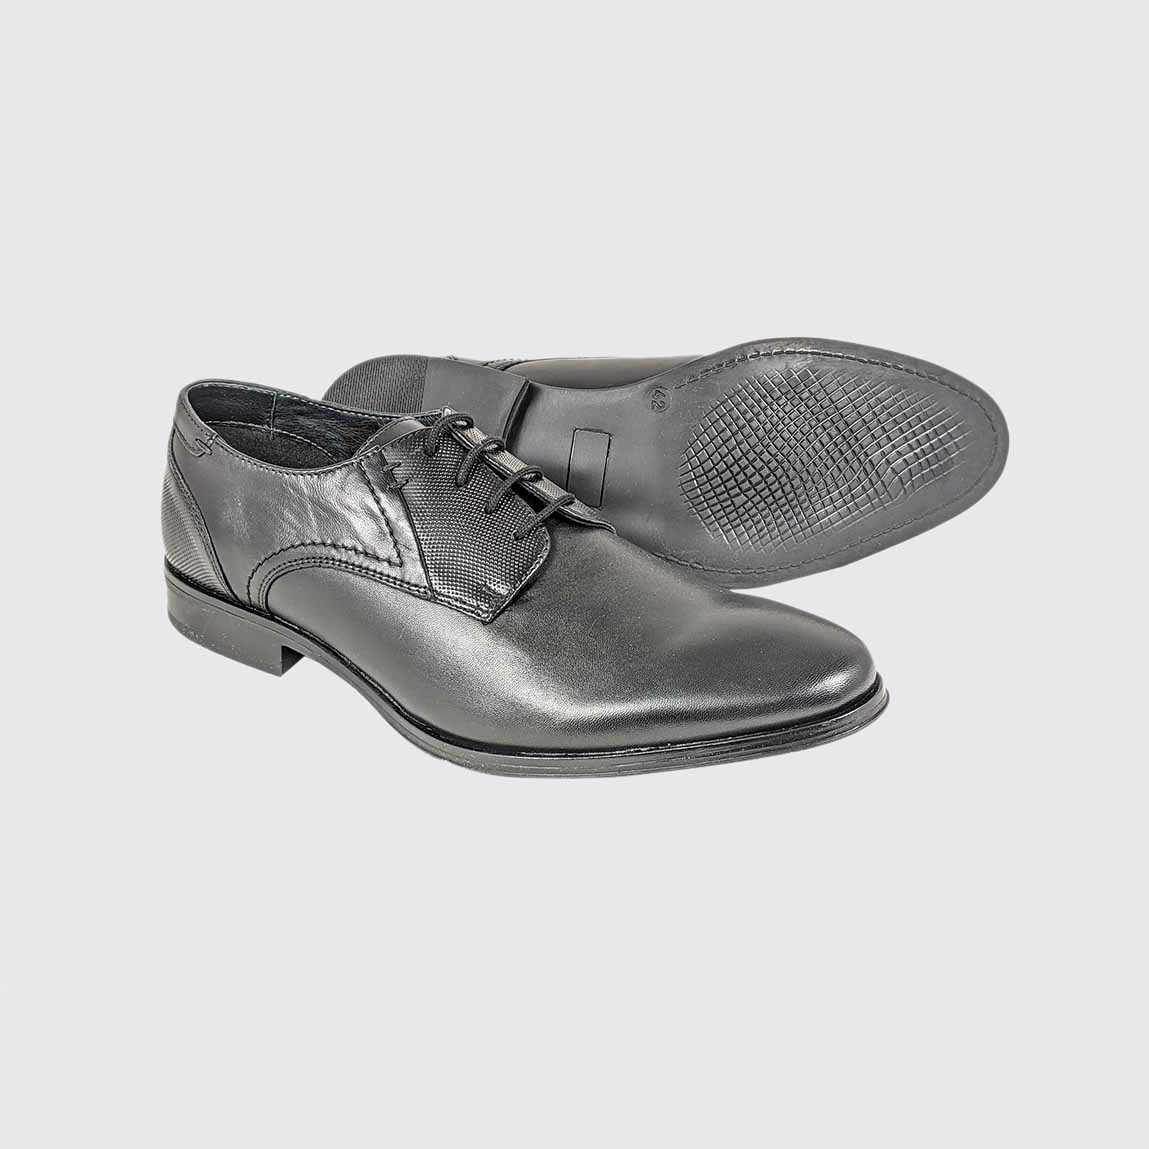 Angle view of the Dubarry Drago Black lace-up derby shoe.